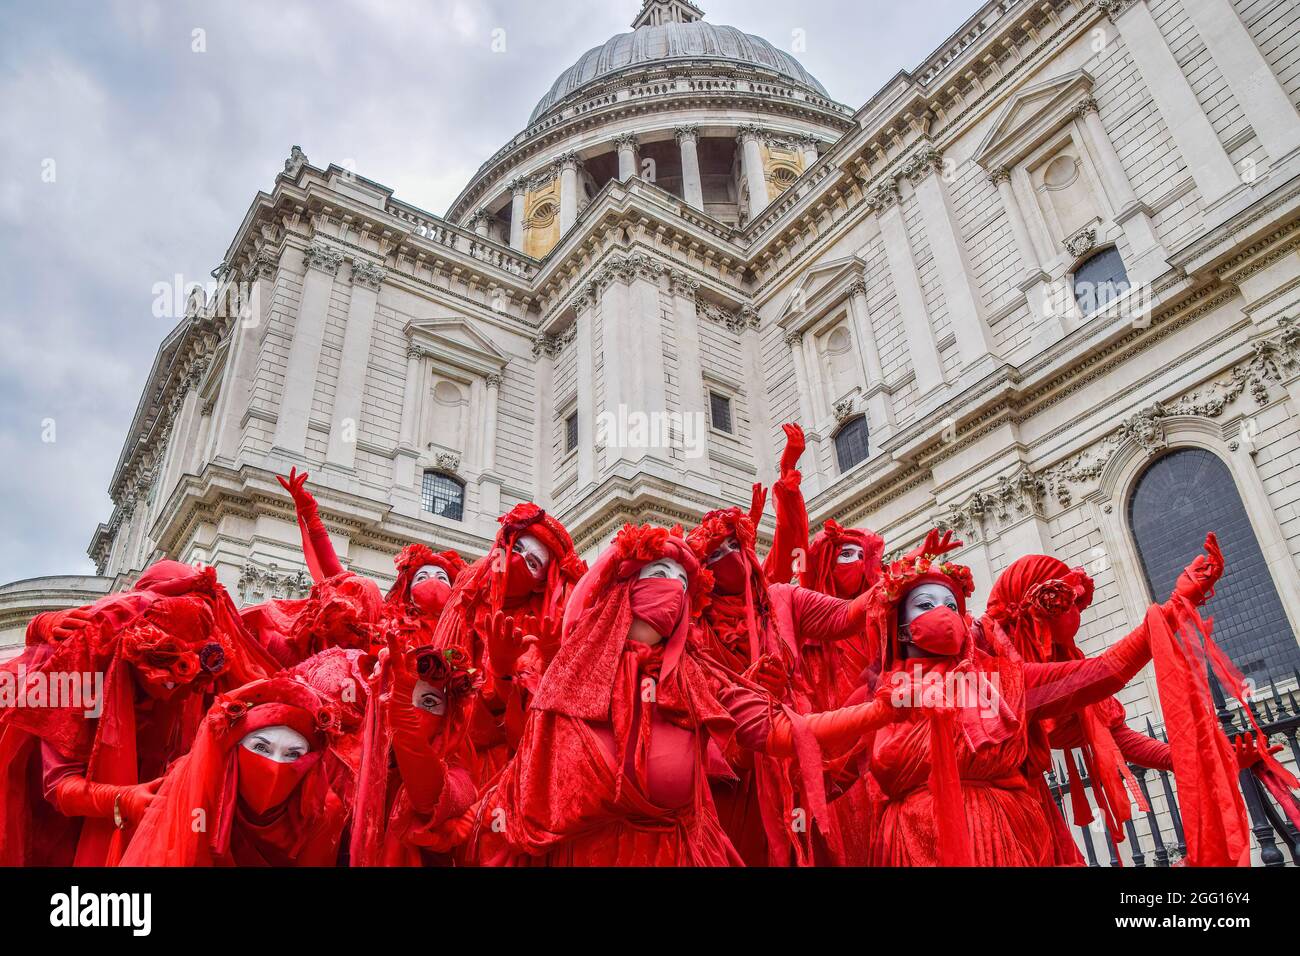 London, UK. 27th Aug, 2021. Extinction Rebellion's Red Rebel Brigade perform outside St Paul's Cathedral during the demonstration. Extinction Rebellion protesters staged the Blood Money March, part of their two-week Impossible Rebellion campaign, targeting the City of London, the capital's financial hub. (Photo by Vuk Valcic/SOPA Images/Sipa USA) Credit: Sipa USA/Alamy Live News Stock Photo